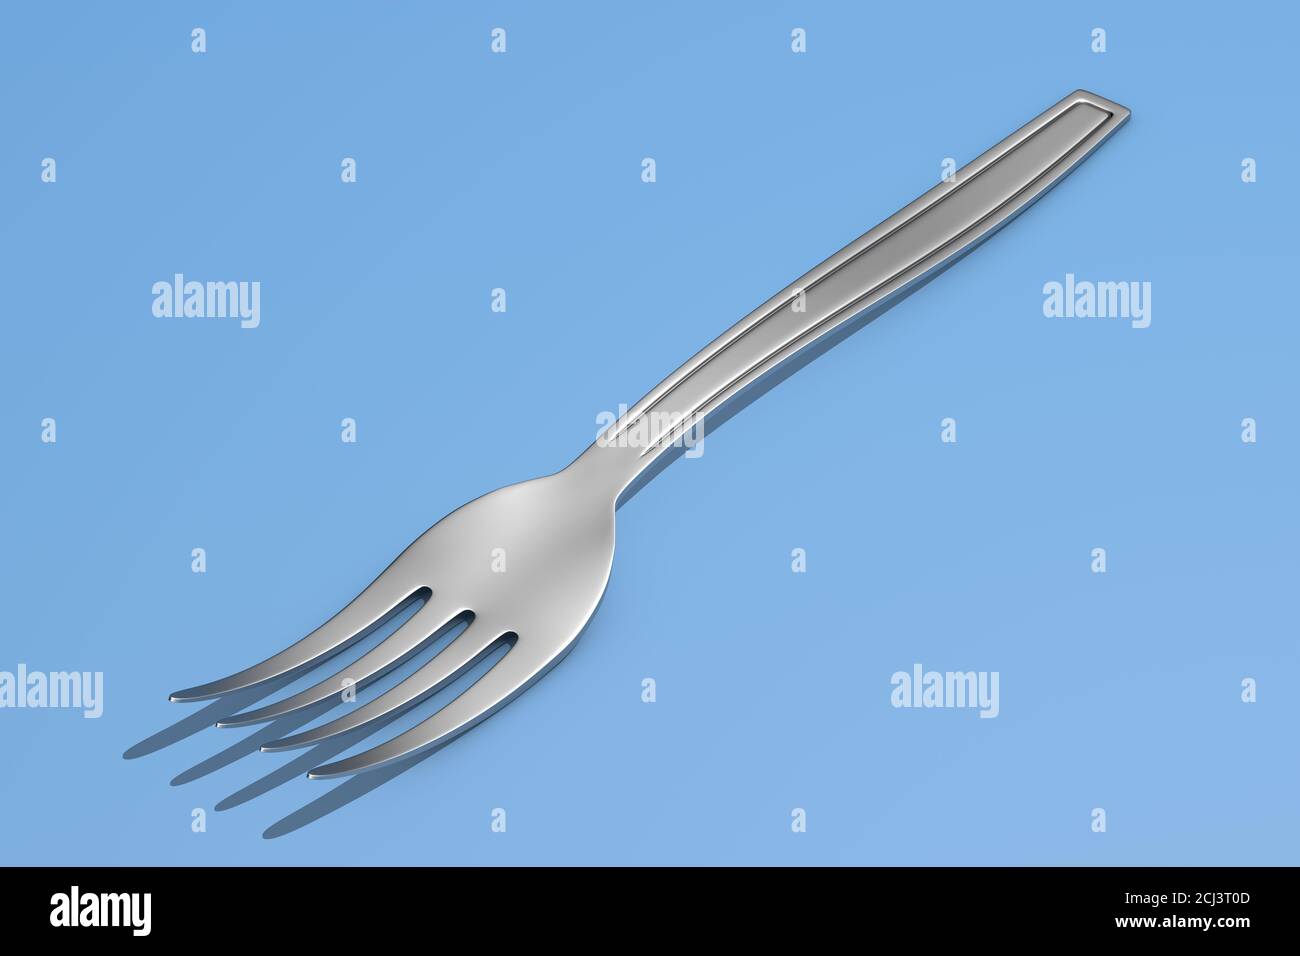 3D image of a fork on a light blue surface Stock Photo